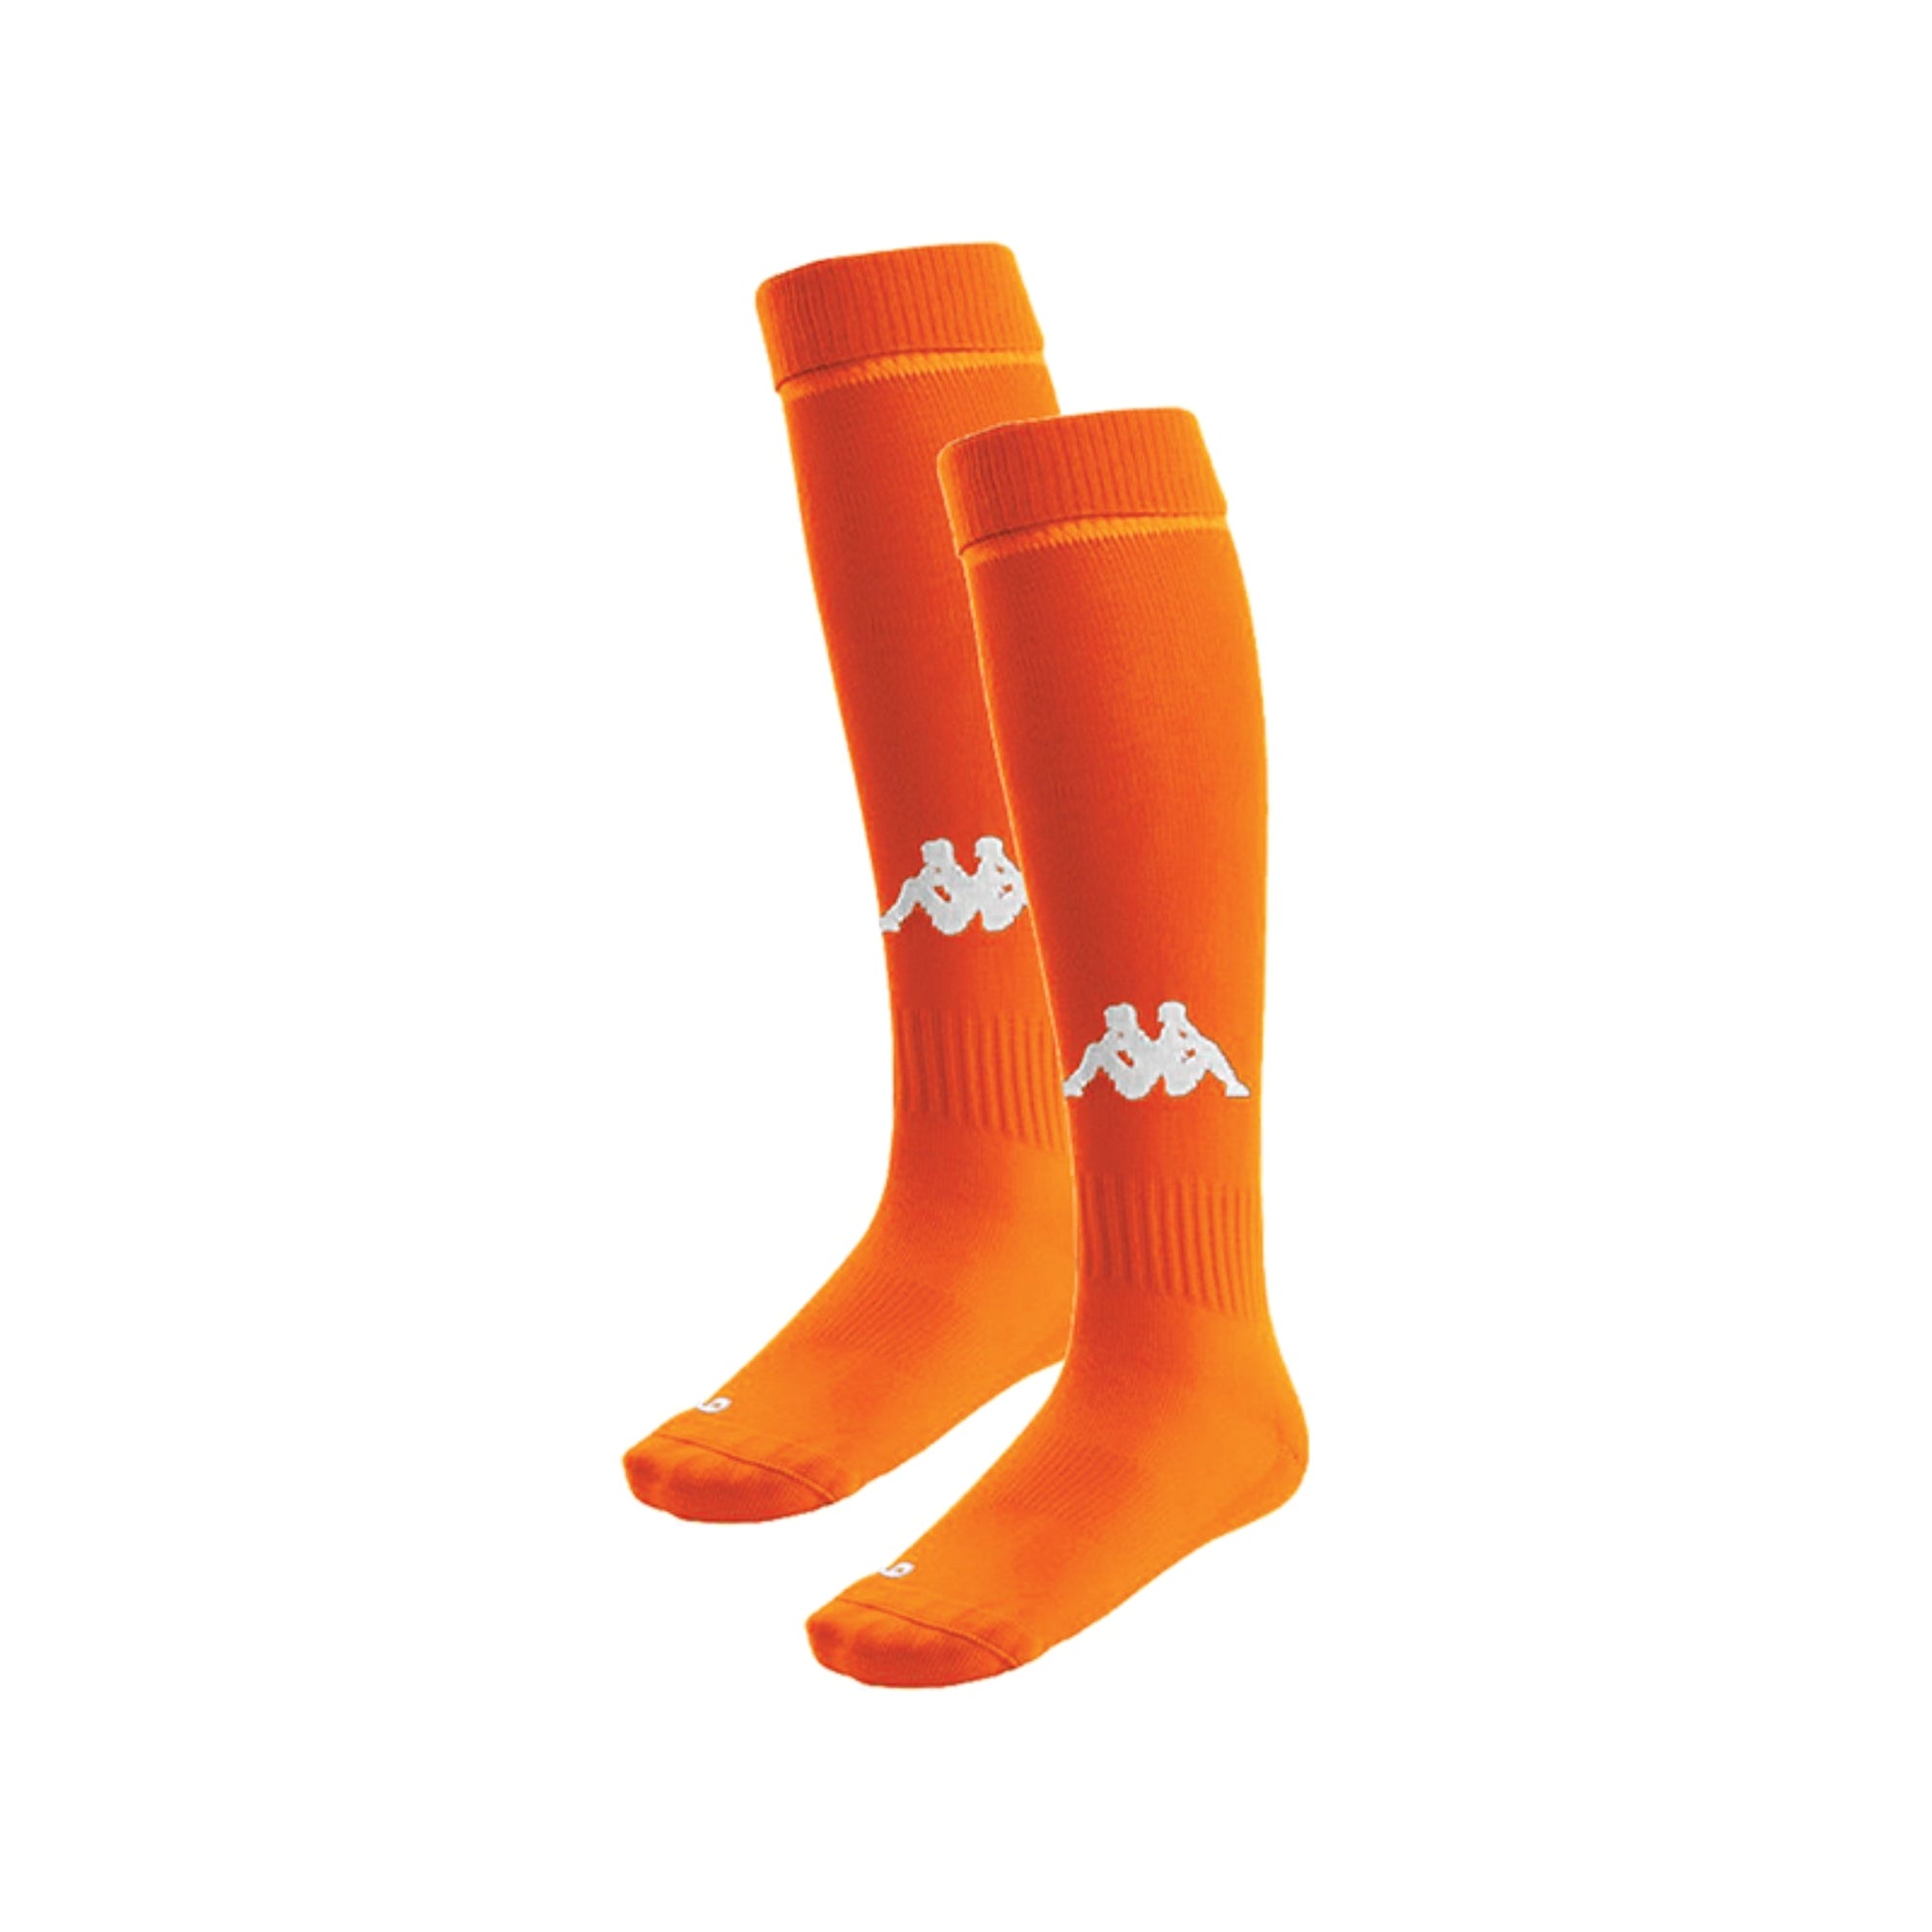 Kappa Penao socks in orange flame with knitted white Omini in the front shin area